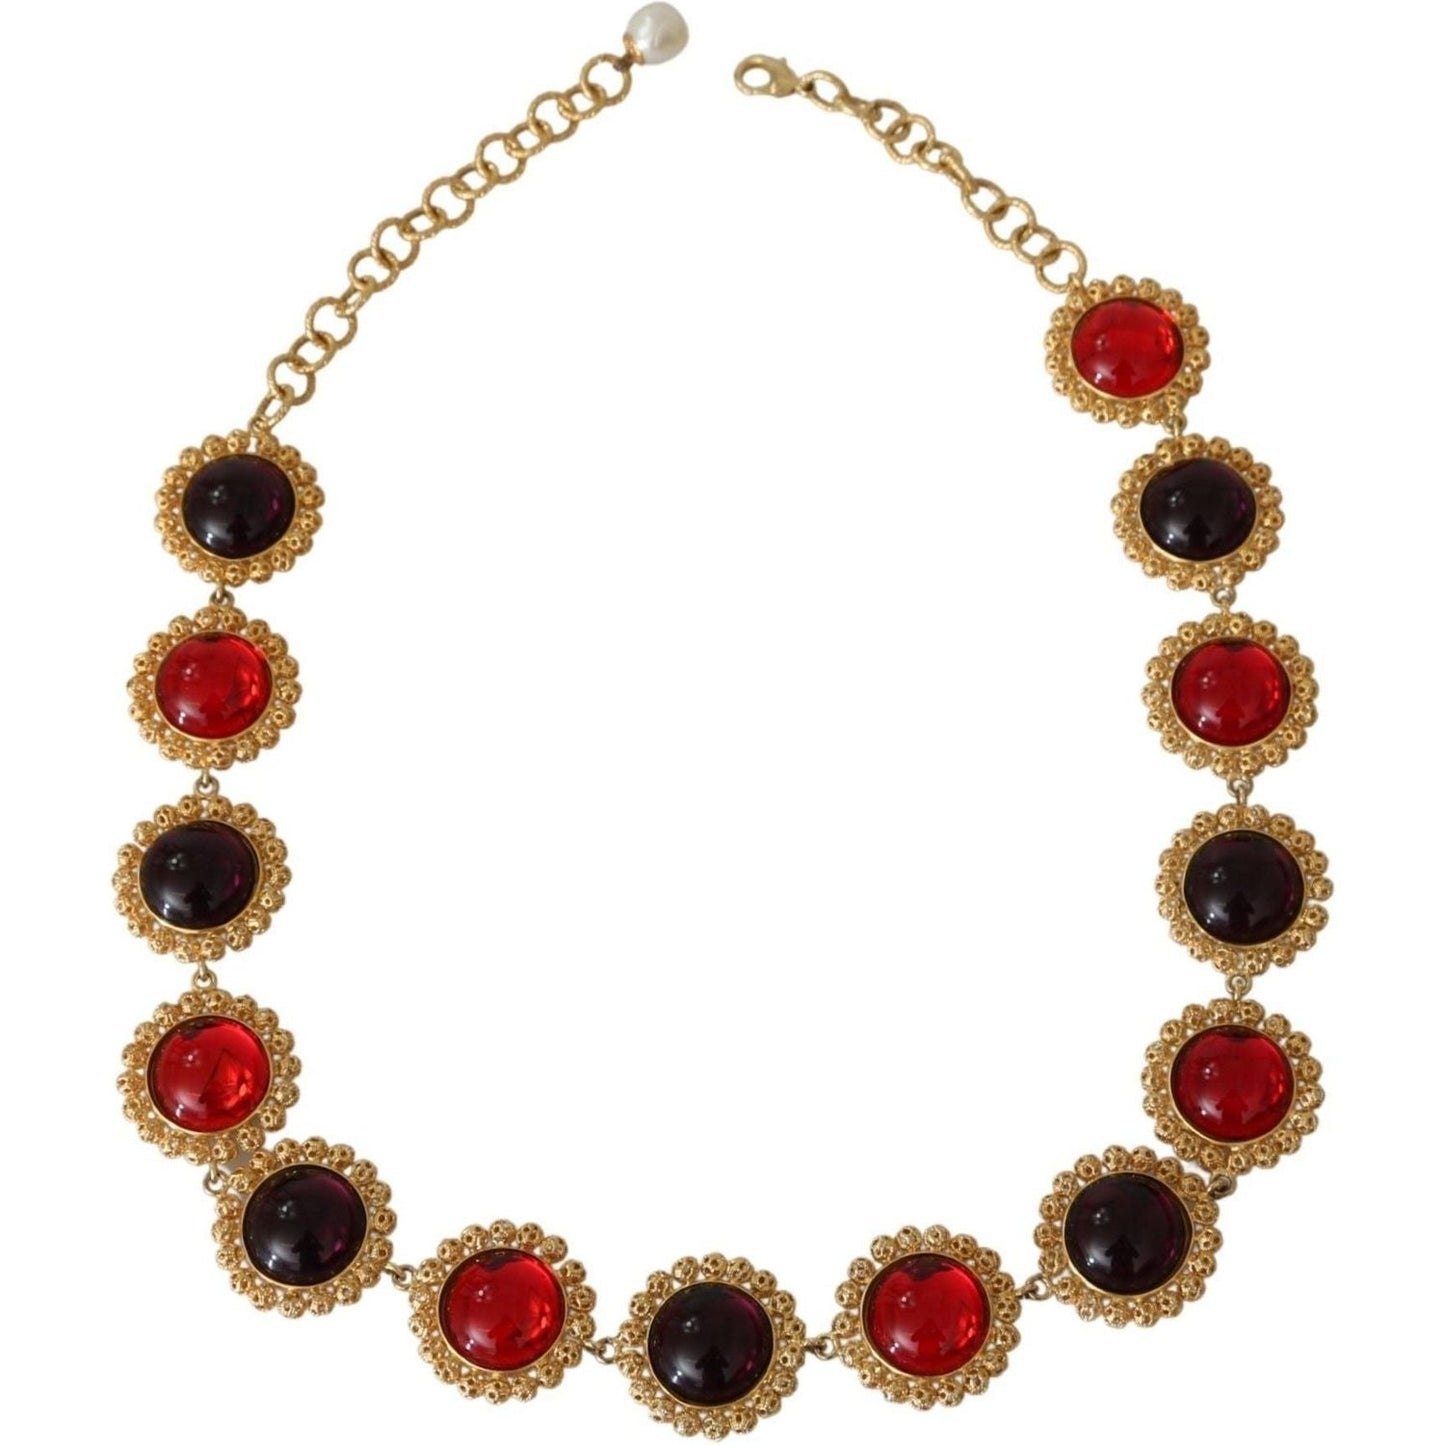 Dolce & Gabbana Elegant Crystal Charm Statement Necklace Necklace red-purple-crystal-floral-chain-statement-gold-brass-necklace IMG_3017-94c9236e-c76.jpg